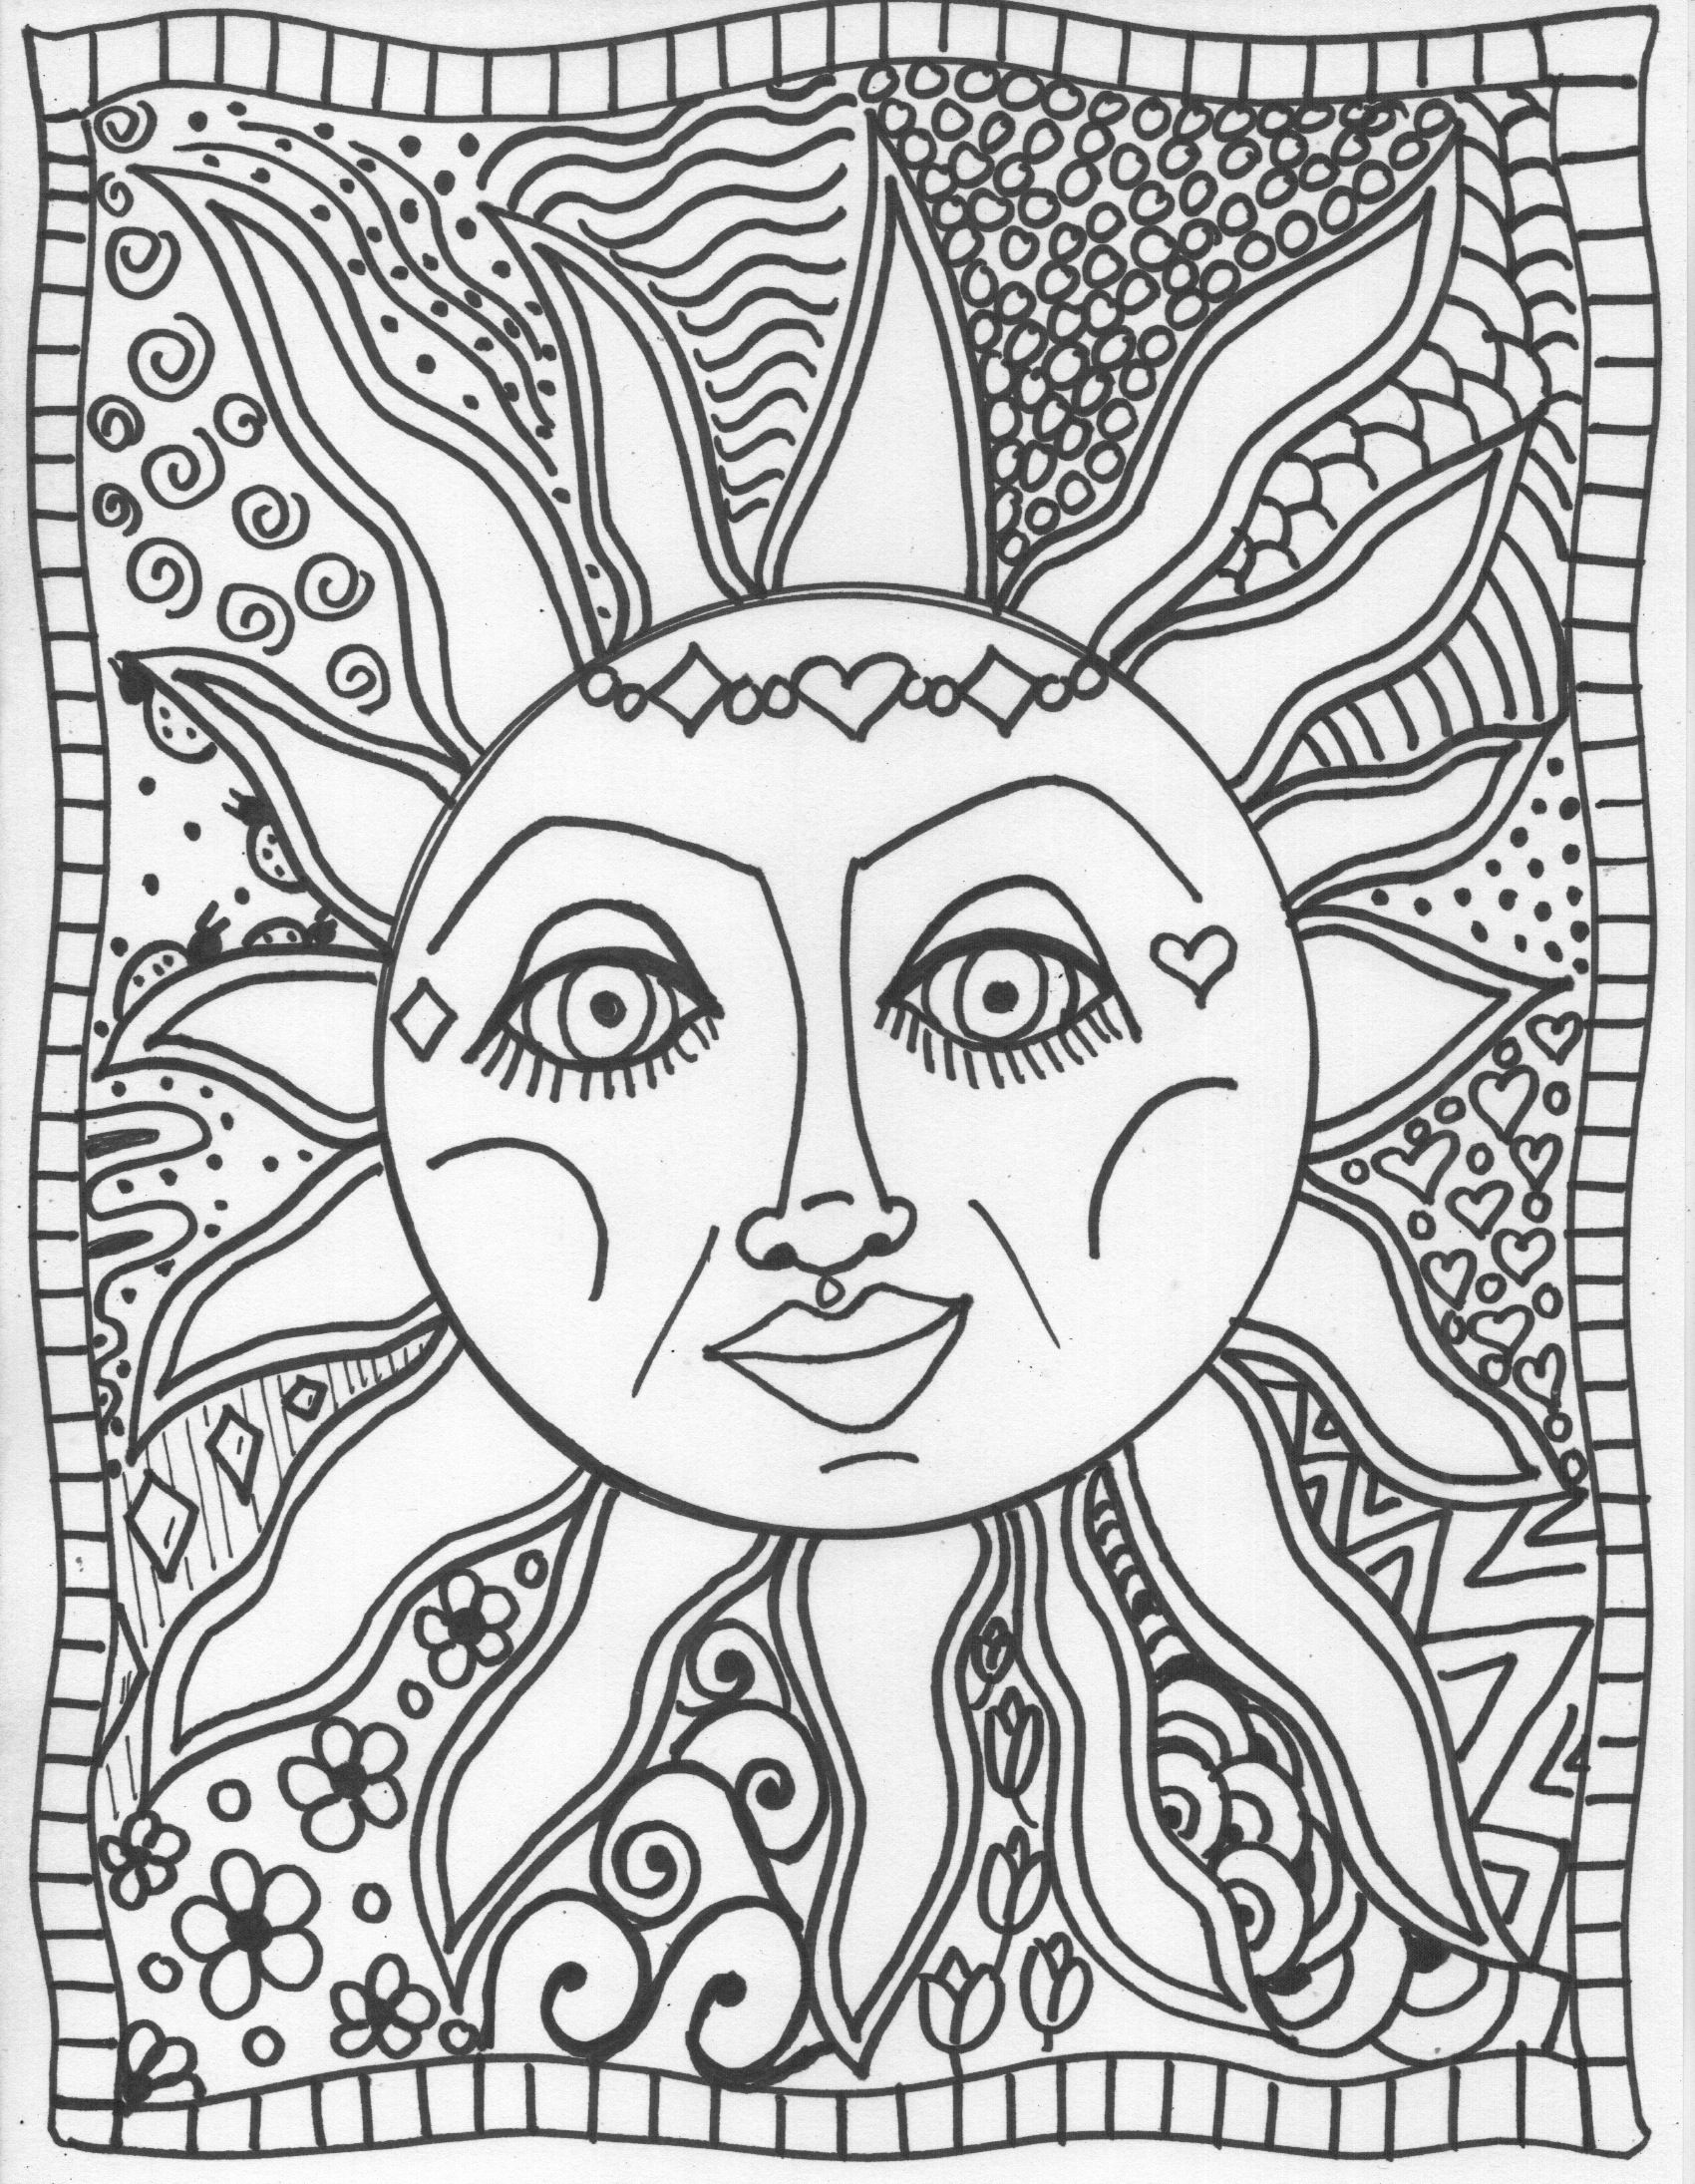 12 Pics of Hippie Sun Coloring Pages - Hippie Sun and Moon ...